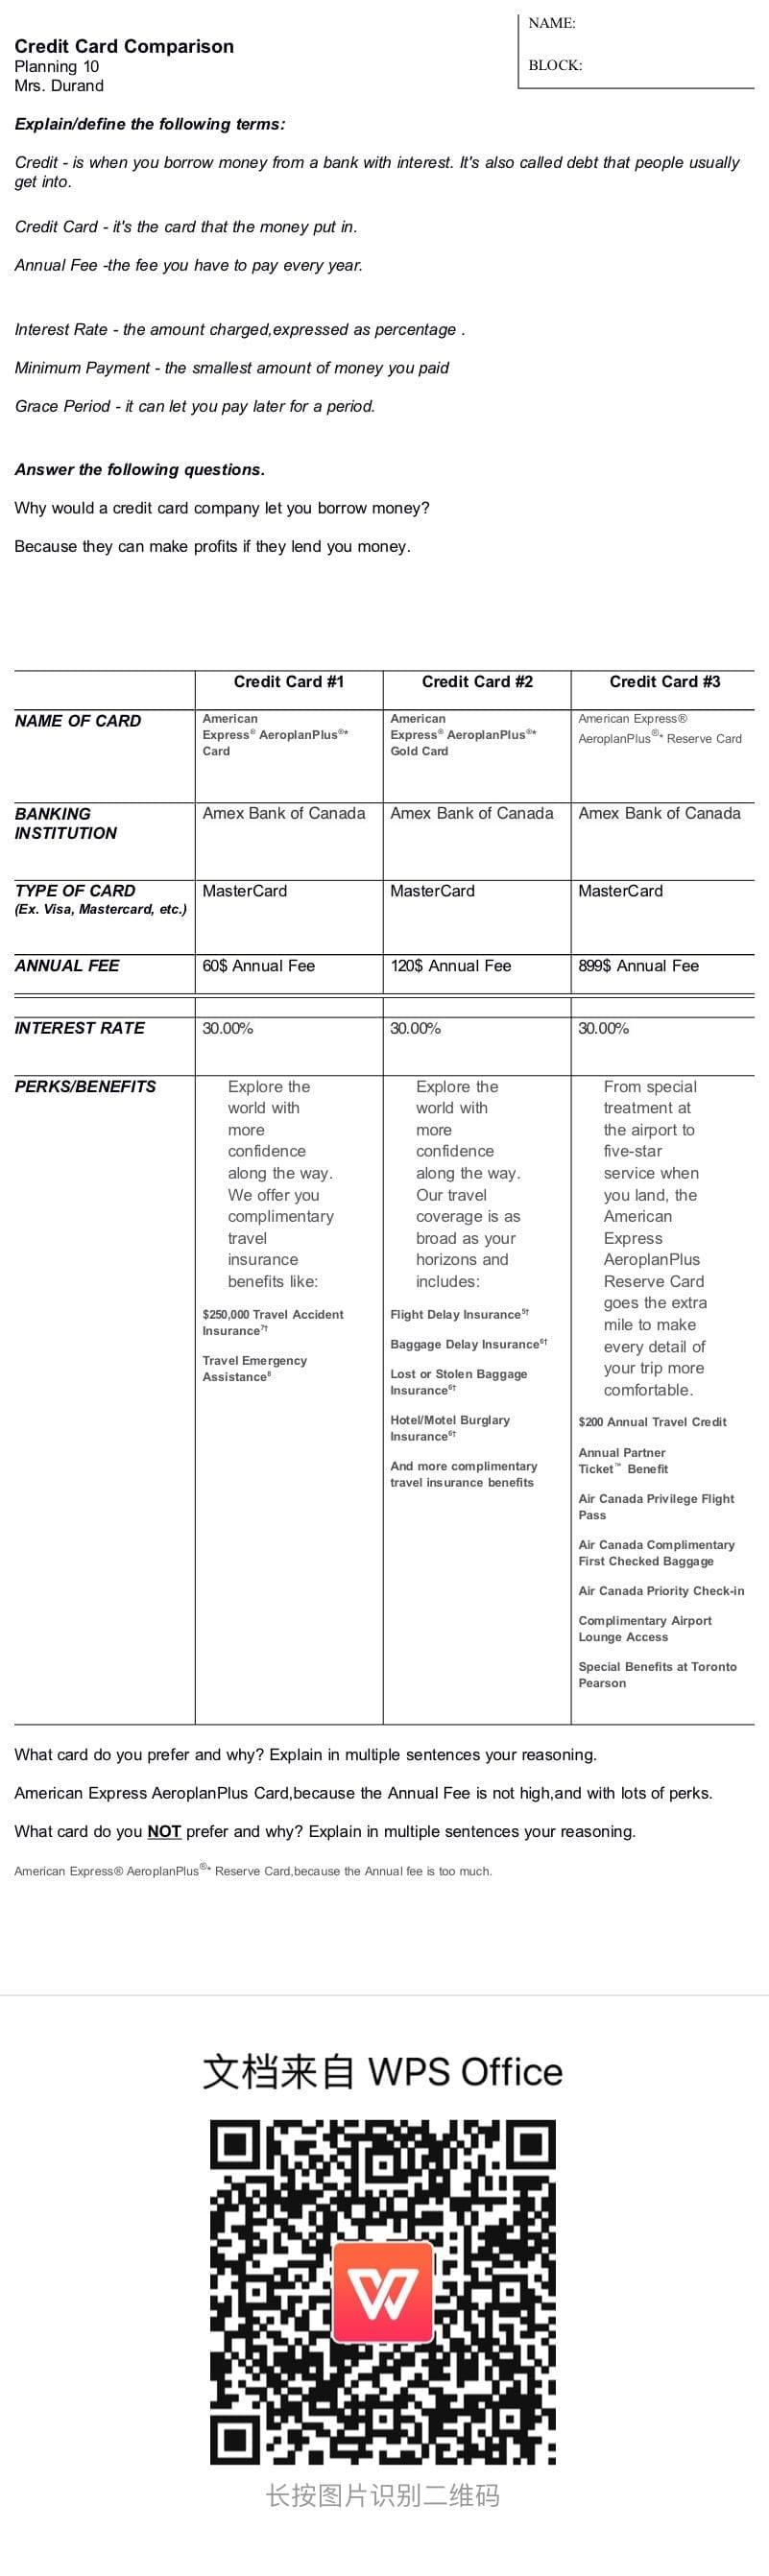 shopping-for-a-credit-credit-card-comparison-worksheet-db-excel